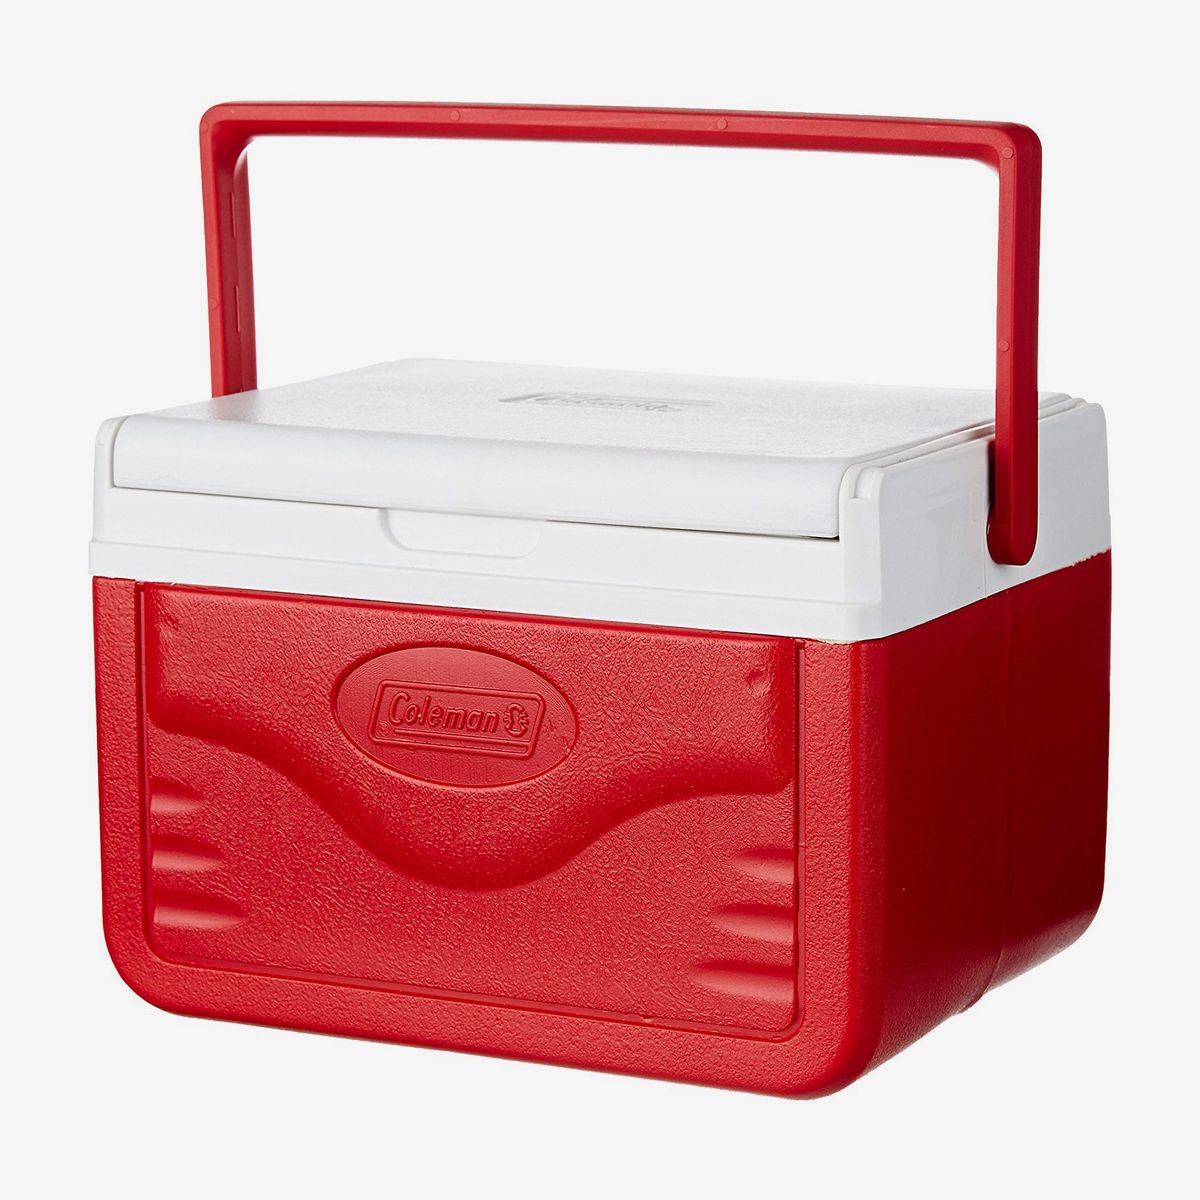 The Best-cooler That Wins Customers